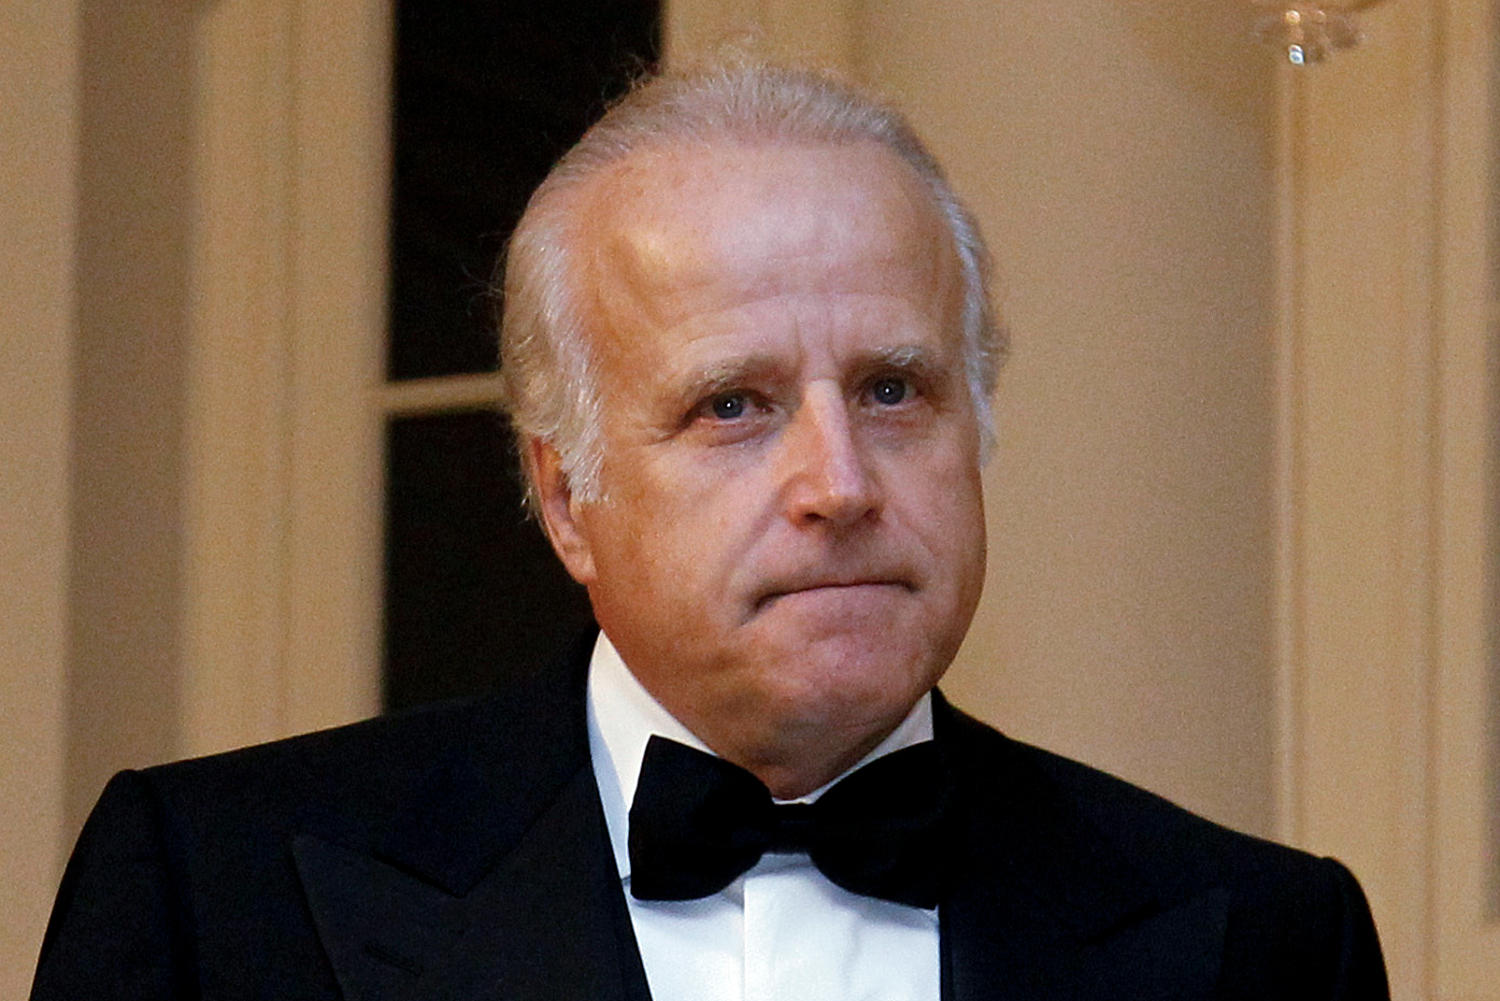 President's brother James Biden to face GOP-led House committees